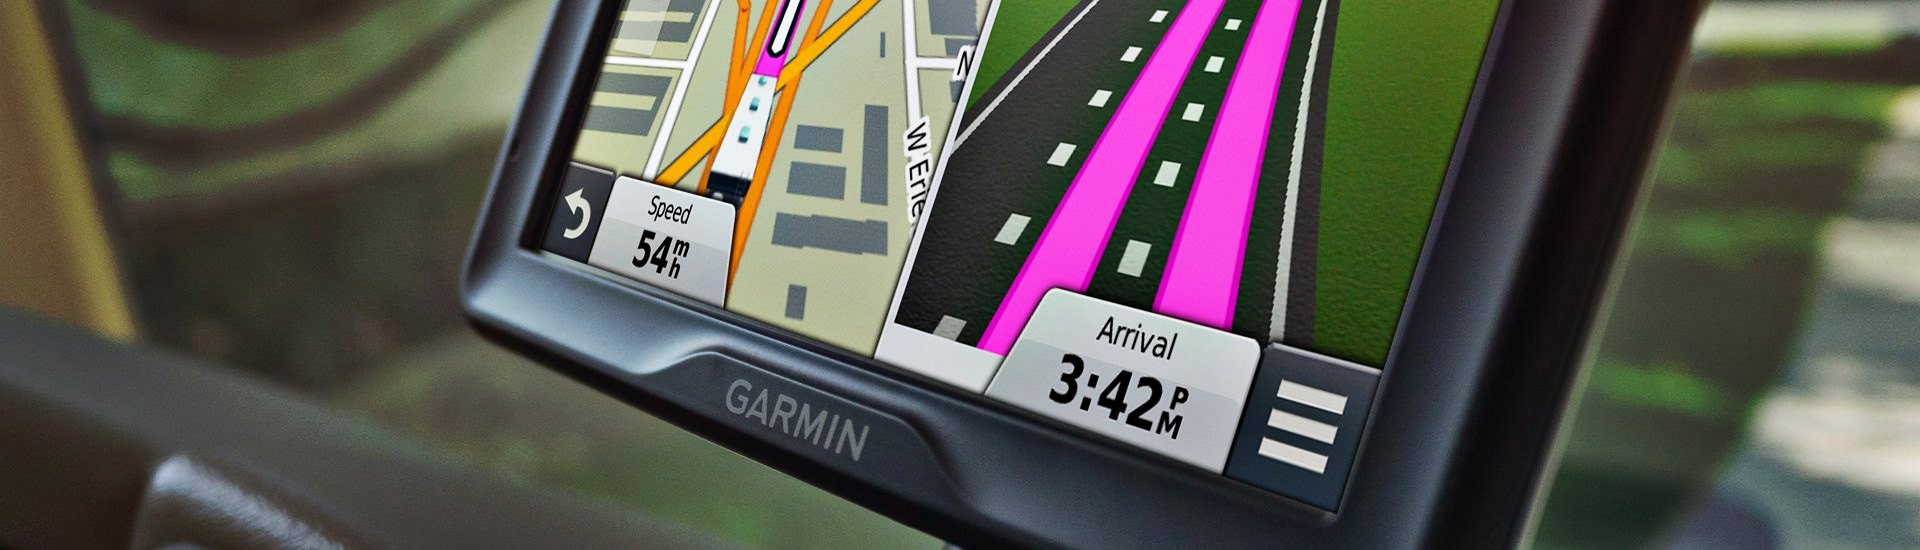 Advantages Of A GPS Navigation System In Your Vehicle